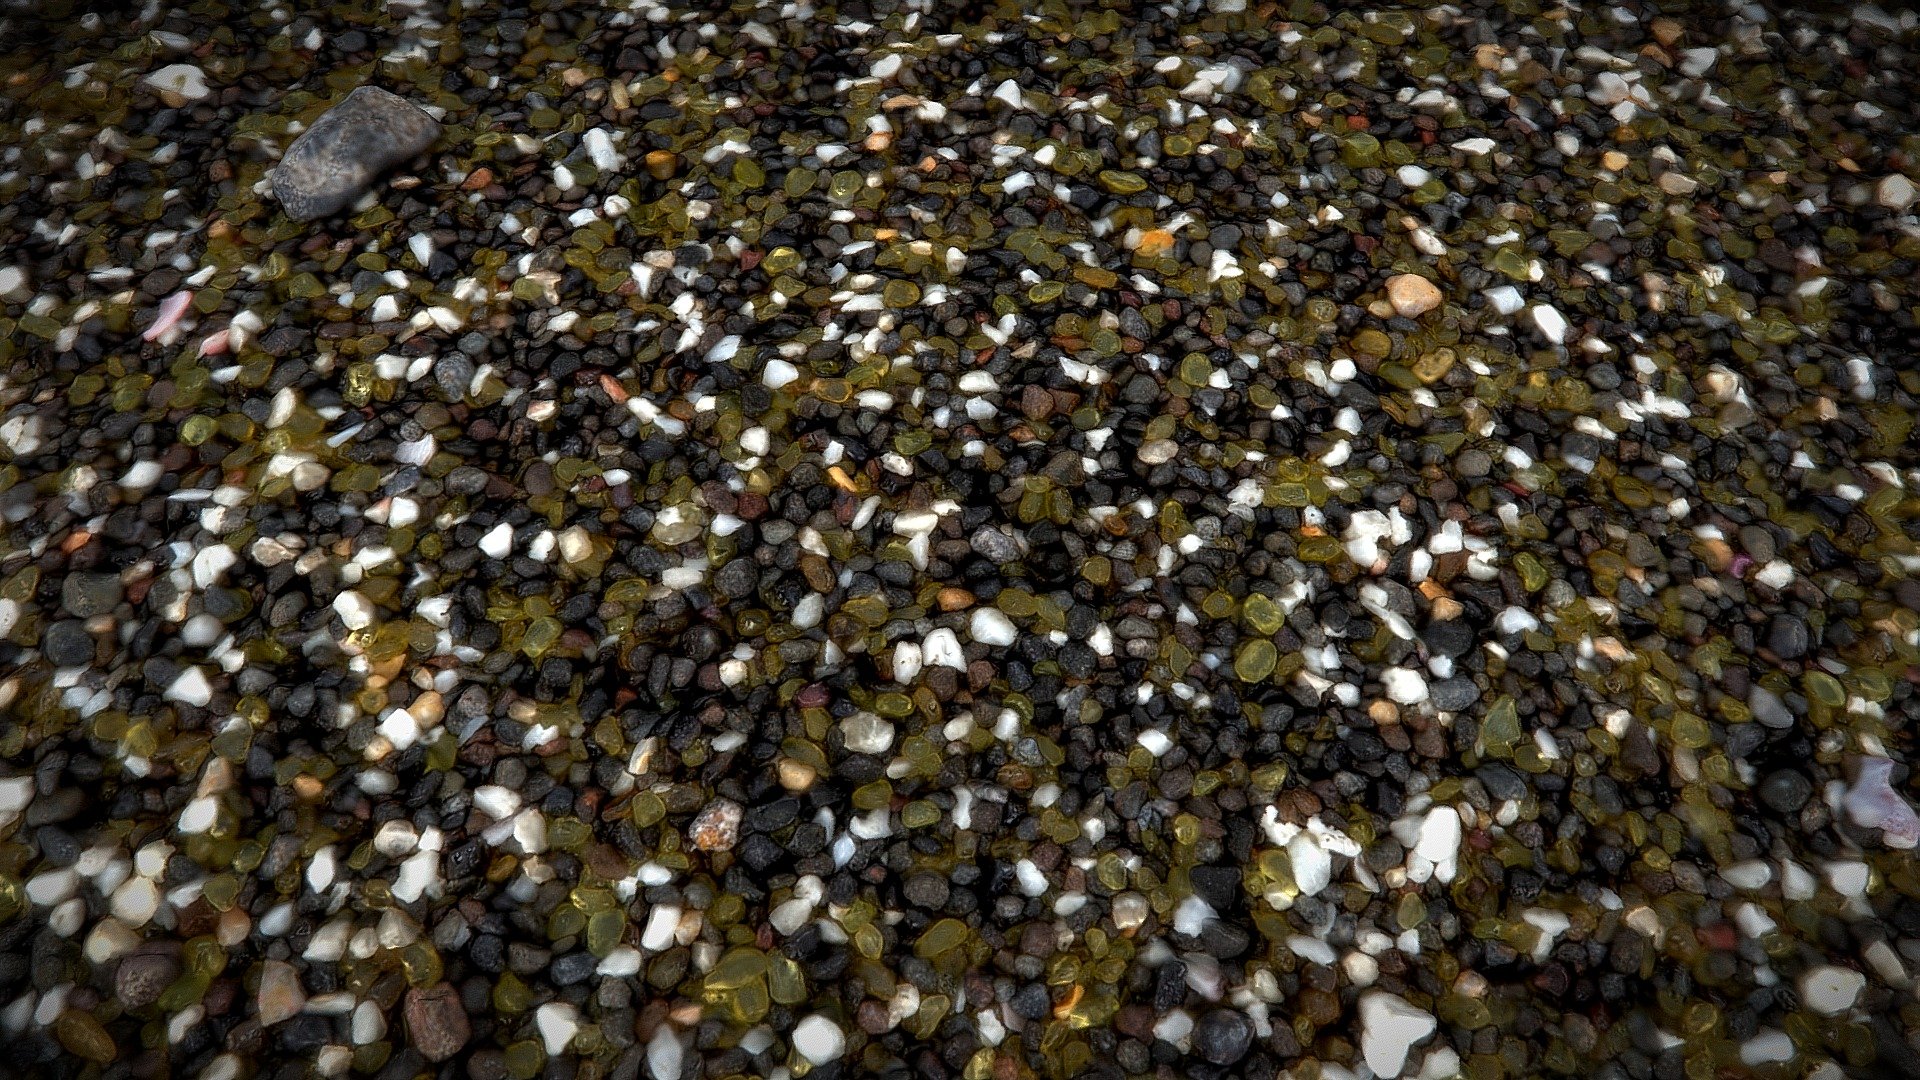 Sand with Peridot and Pyroxenes (close-up)